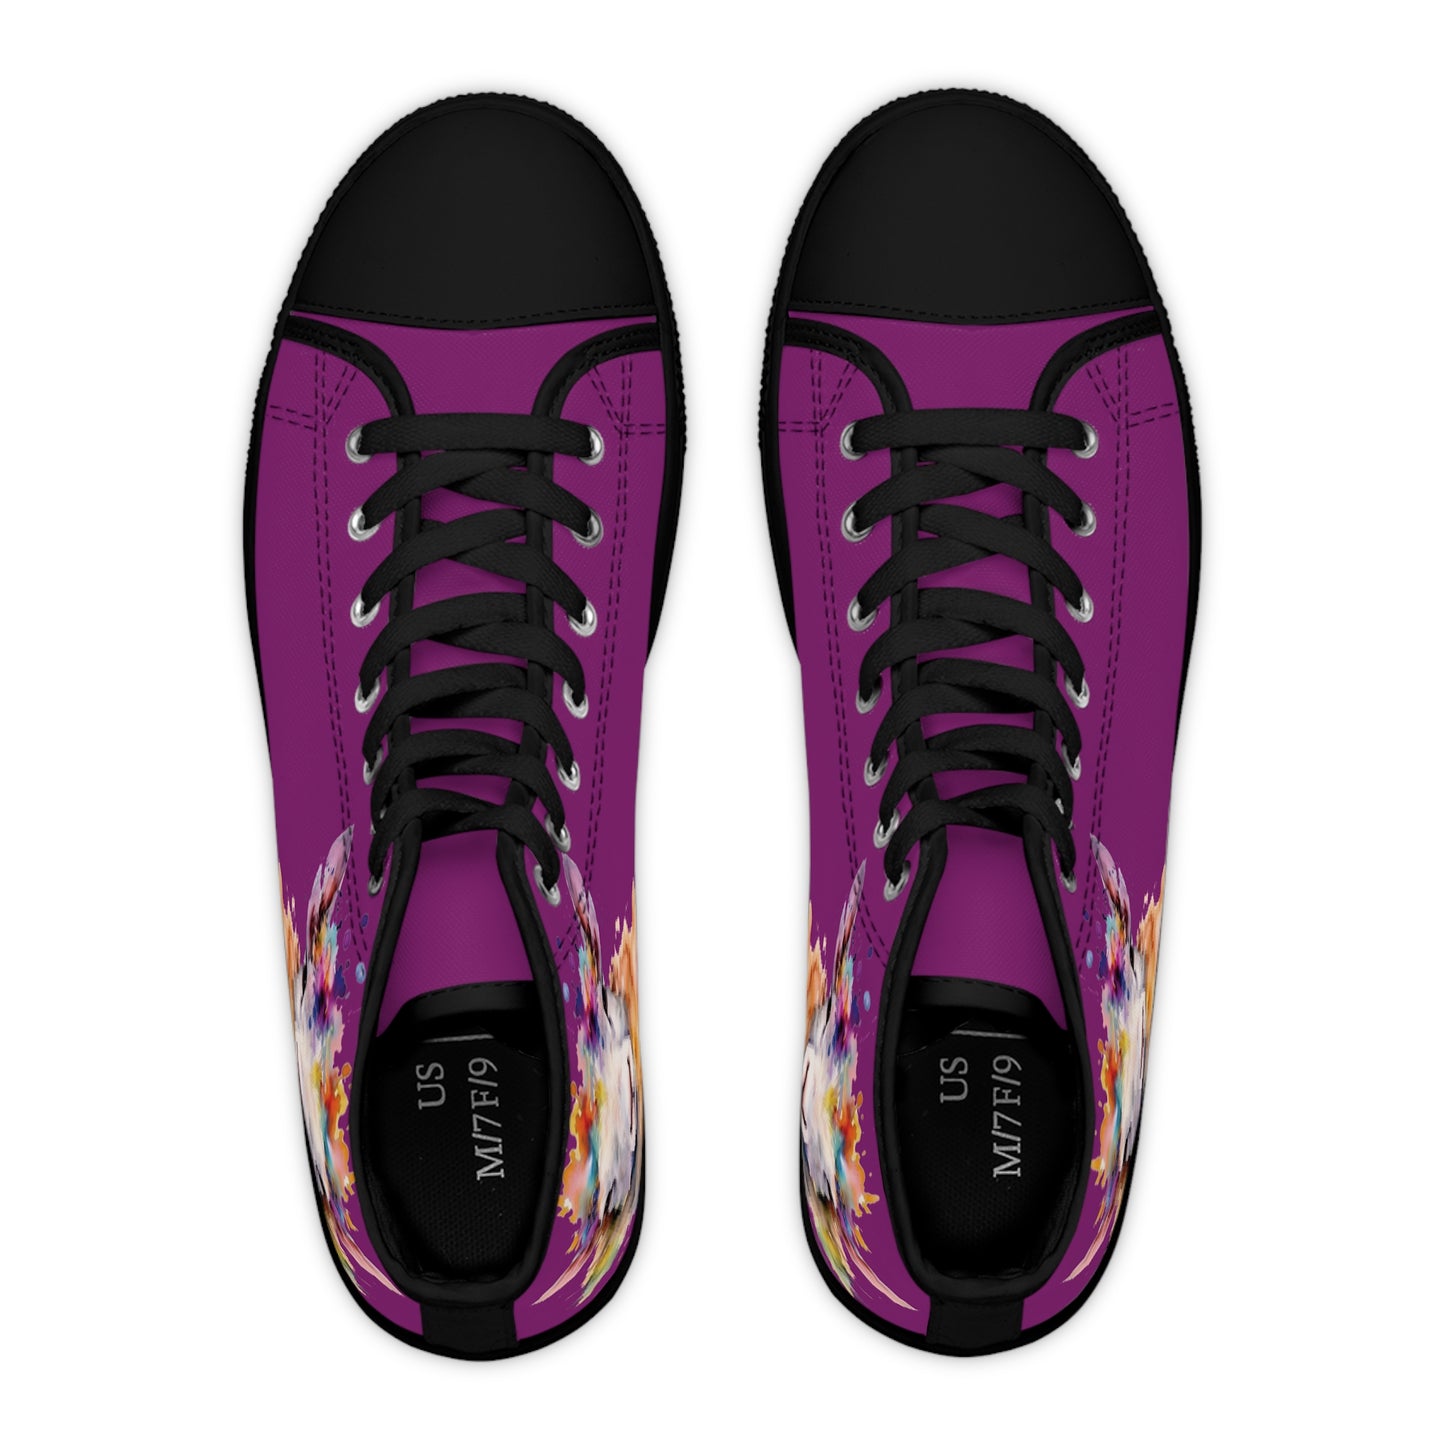 Watercolor Lamb with Flowers Ladies High-Top Sneakers, Livestock Show Sheep Shoes in Deep Purple Color